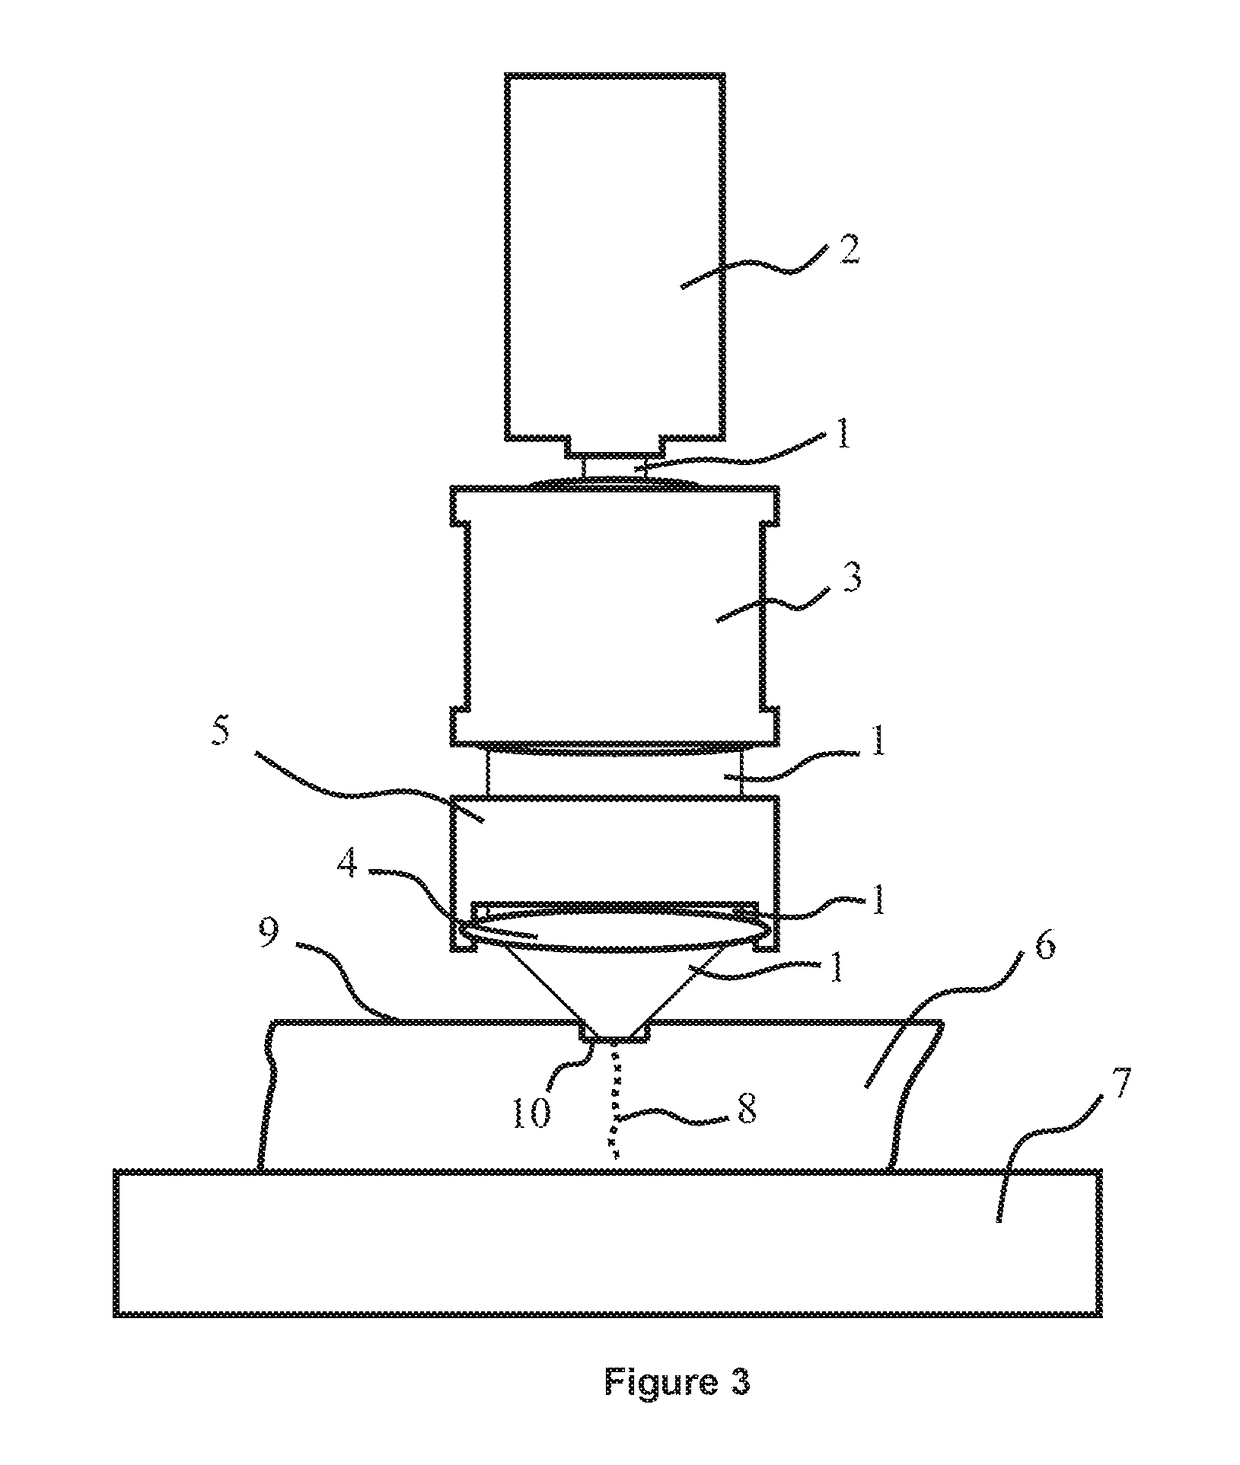 Method of laser processing for substrate cleaving or dicing through forming “spike-like” shaped damage structures